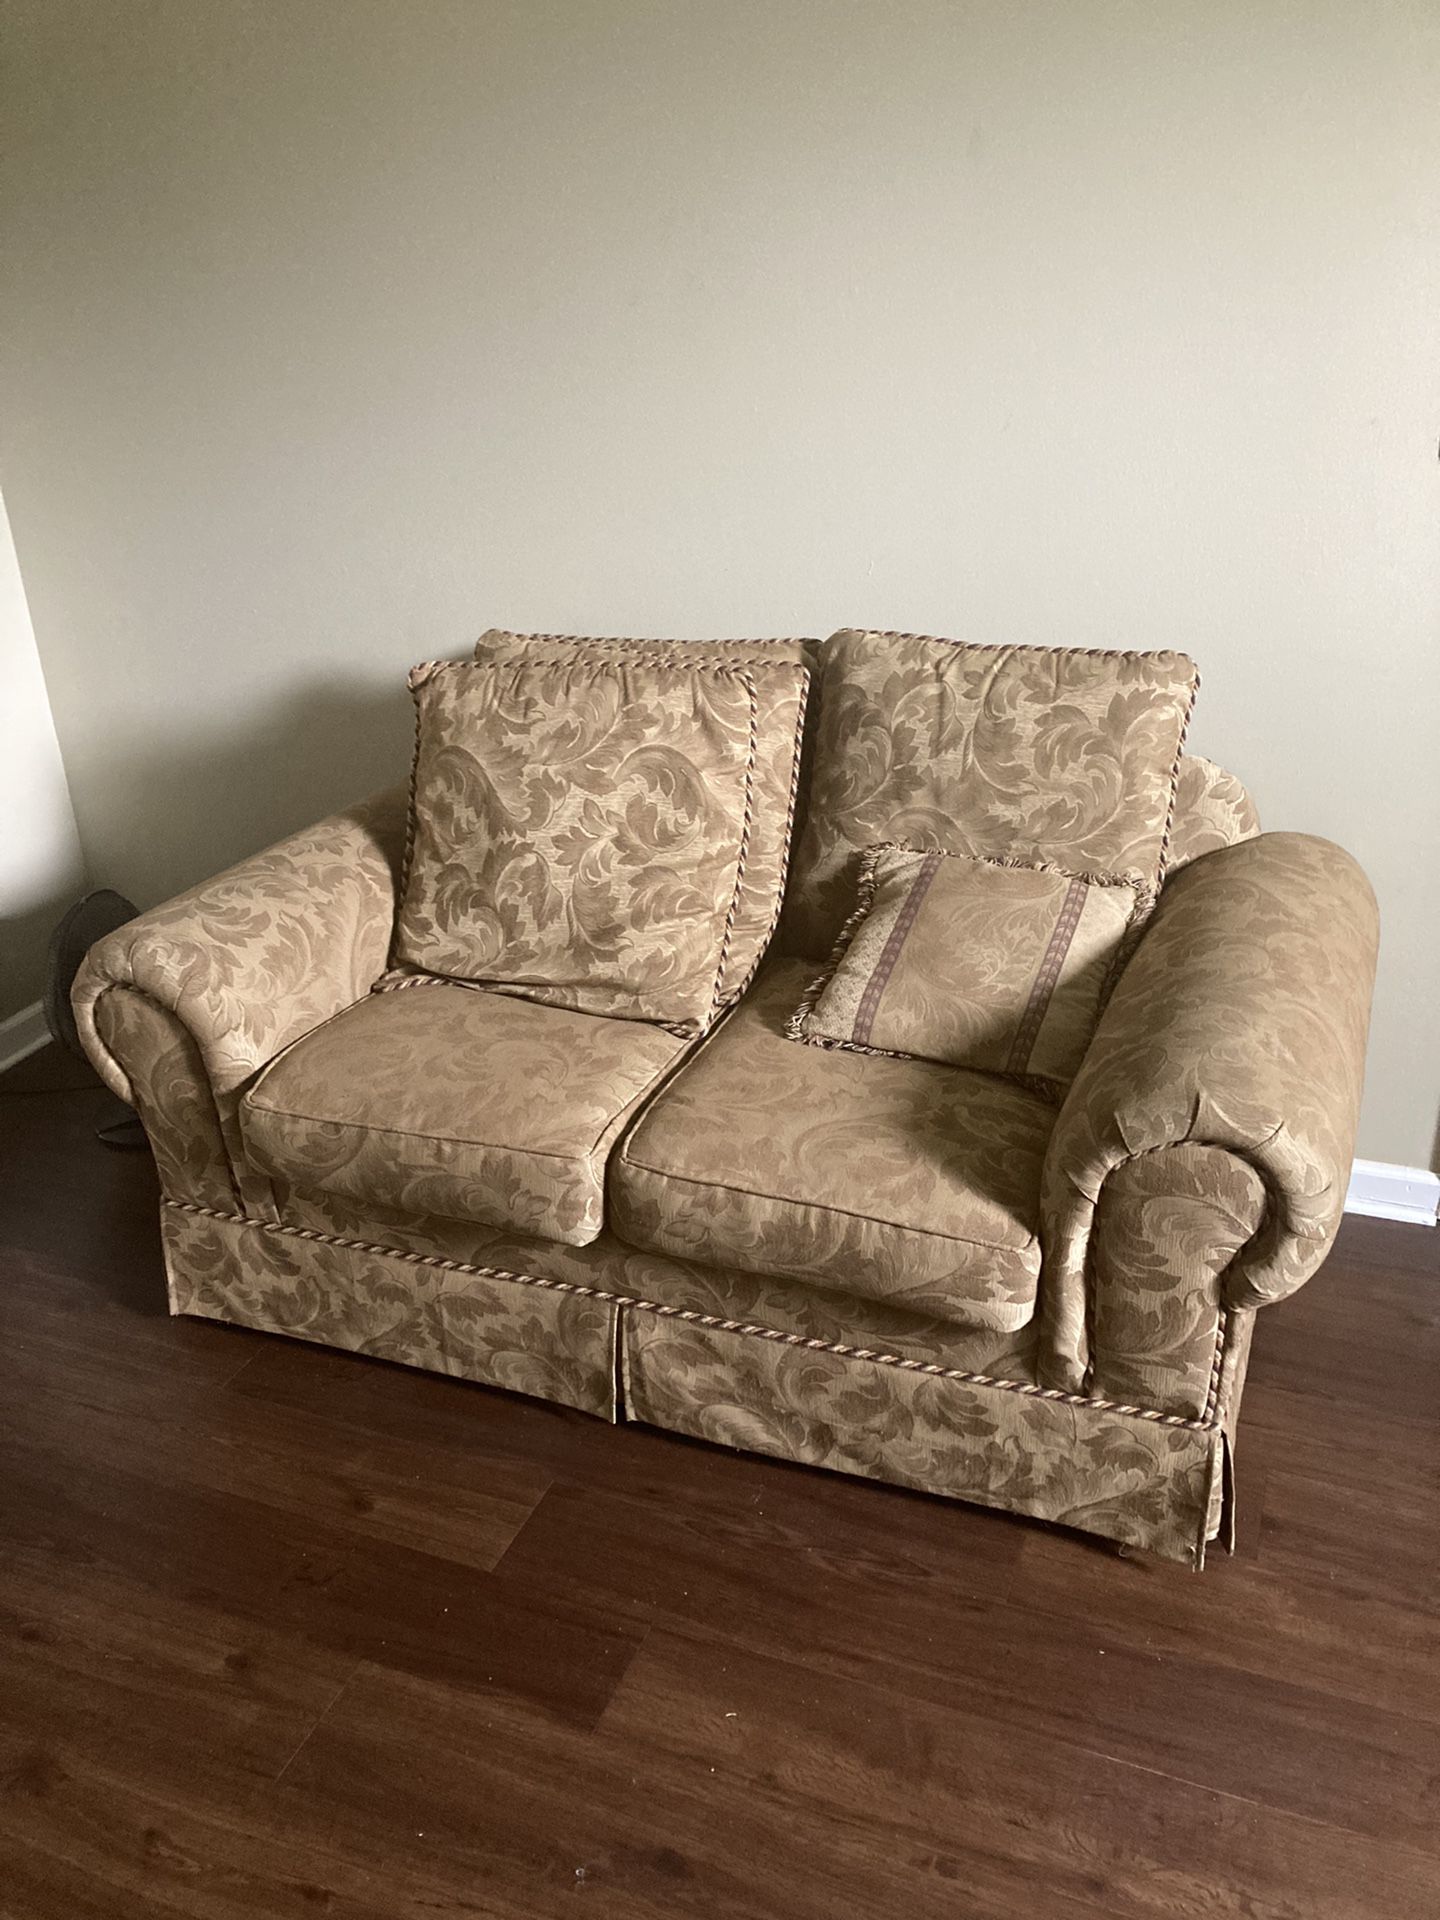 Couch’s Set For Sale!